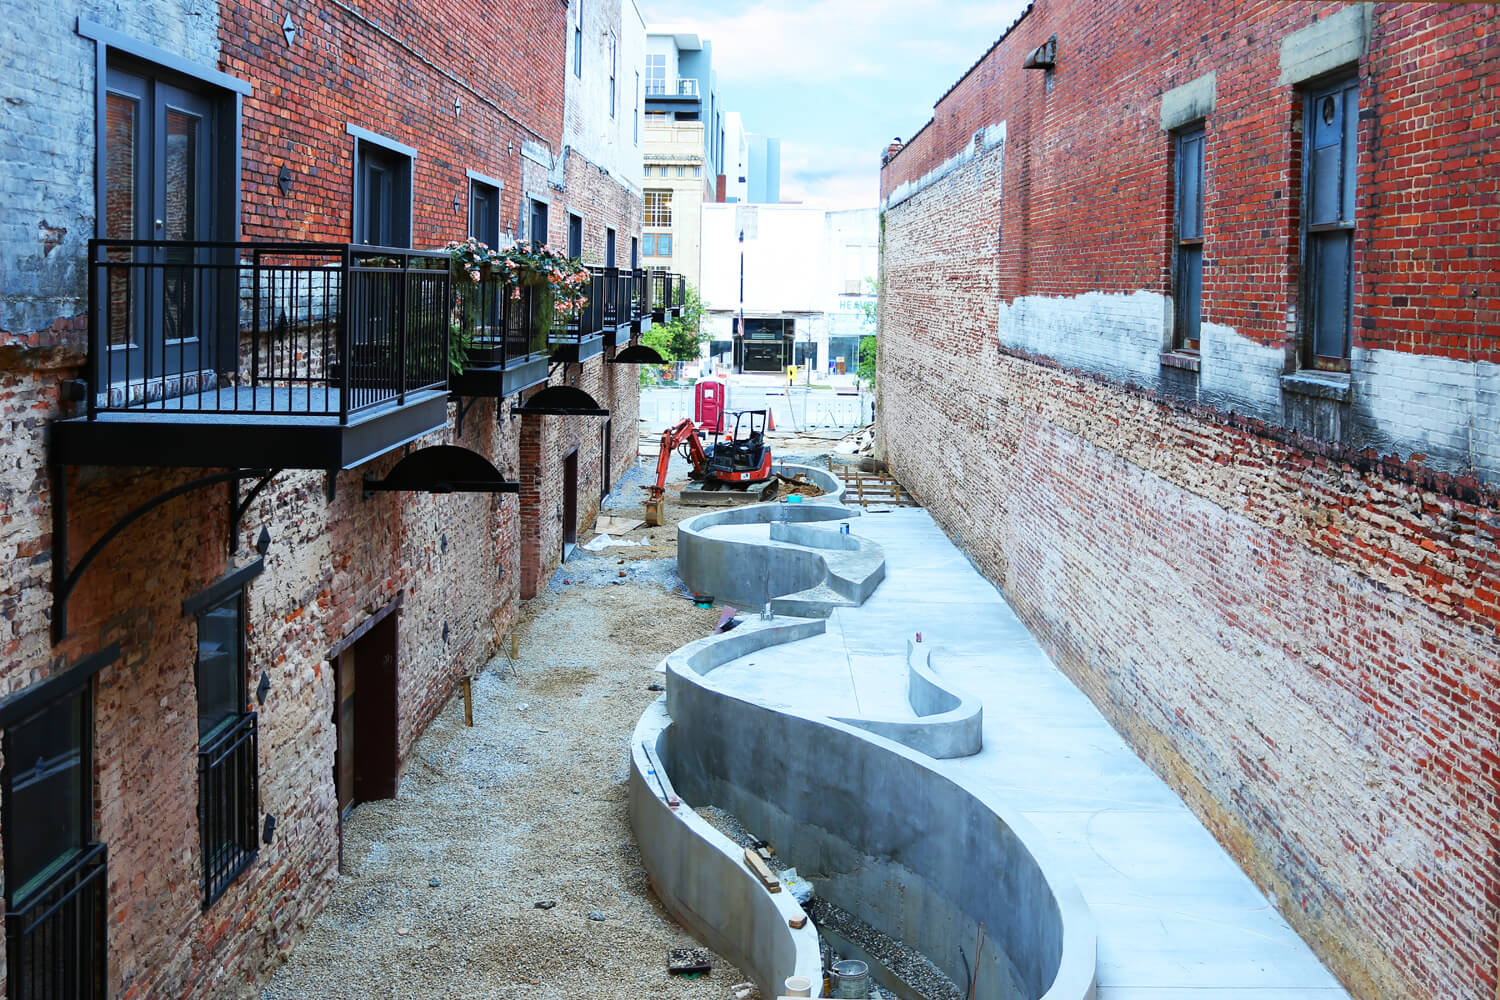 Dexter Alley Park Designed by Foshee Architecture – Aerial View During Construction